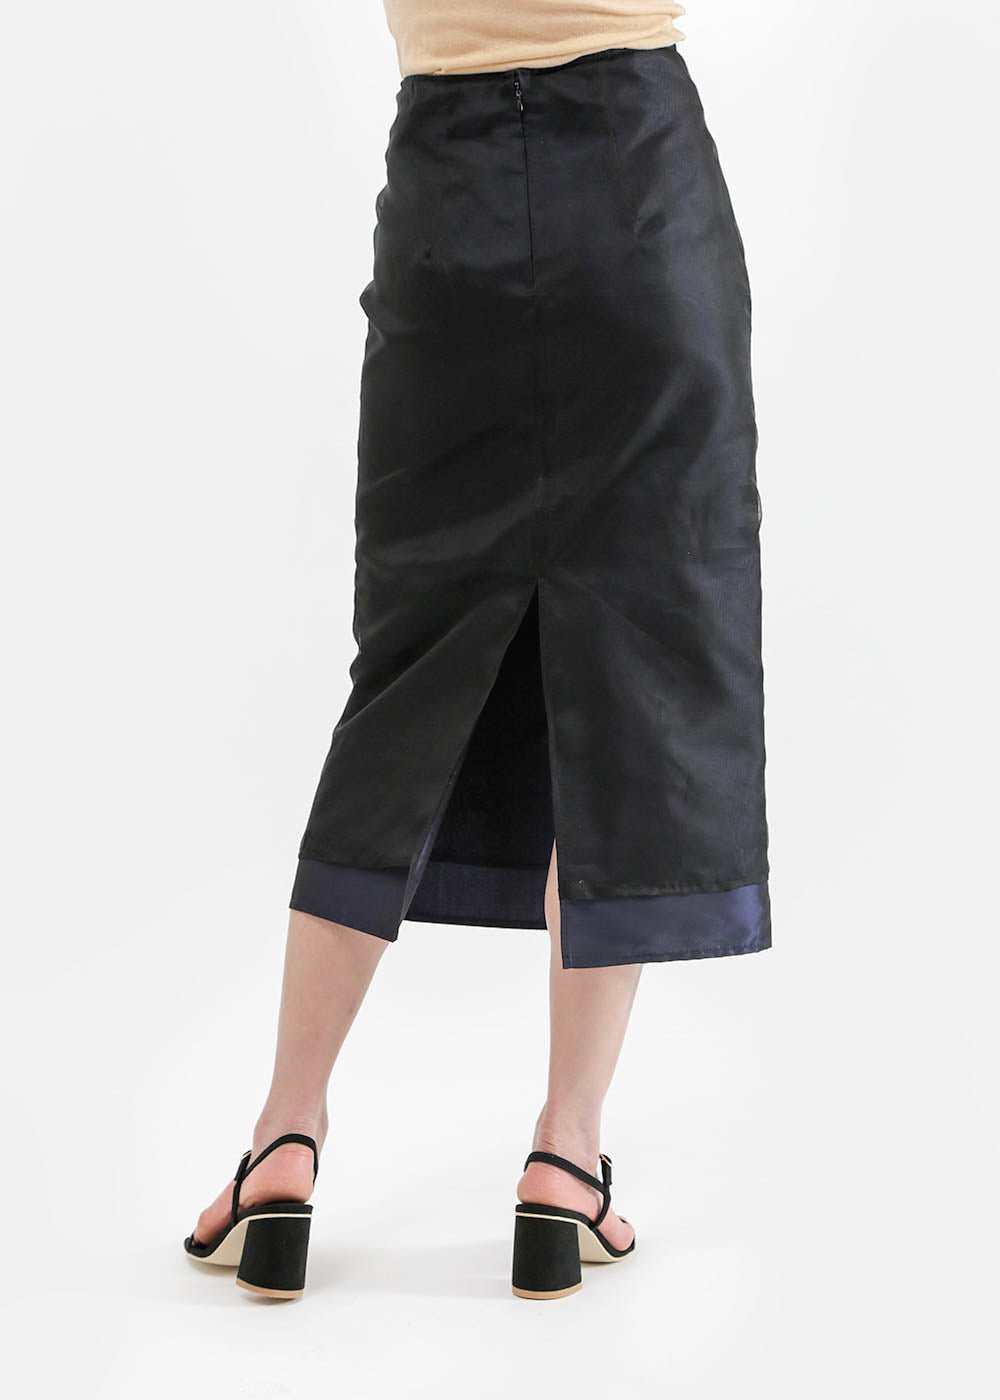 Suzanne Rae Double Layer A-Line Skirt - New Classics Studios Sustainable Ethical Fashion Canada